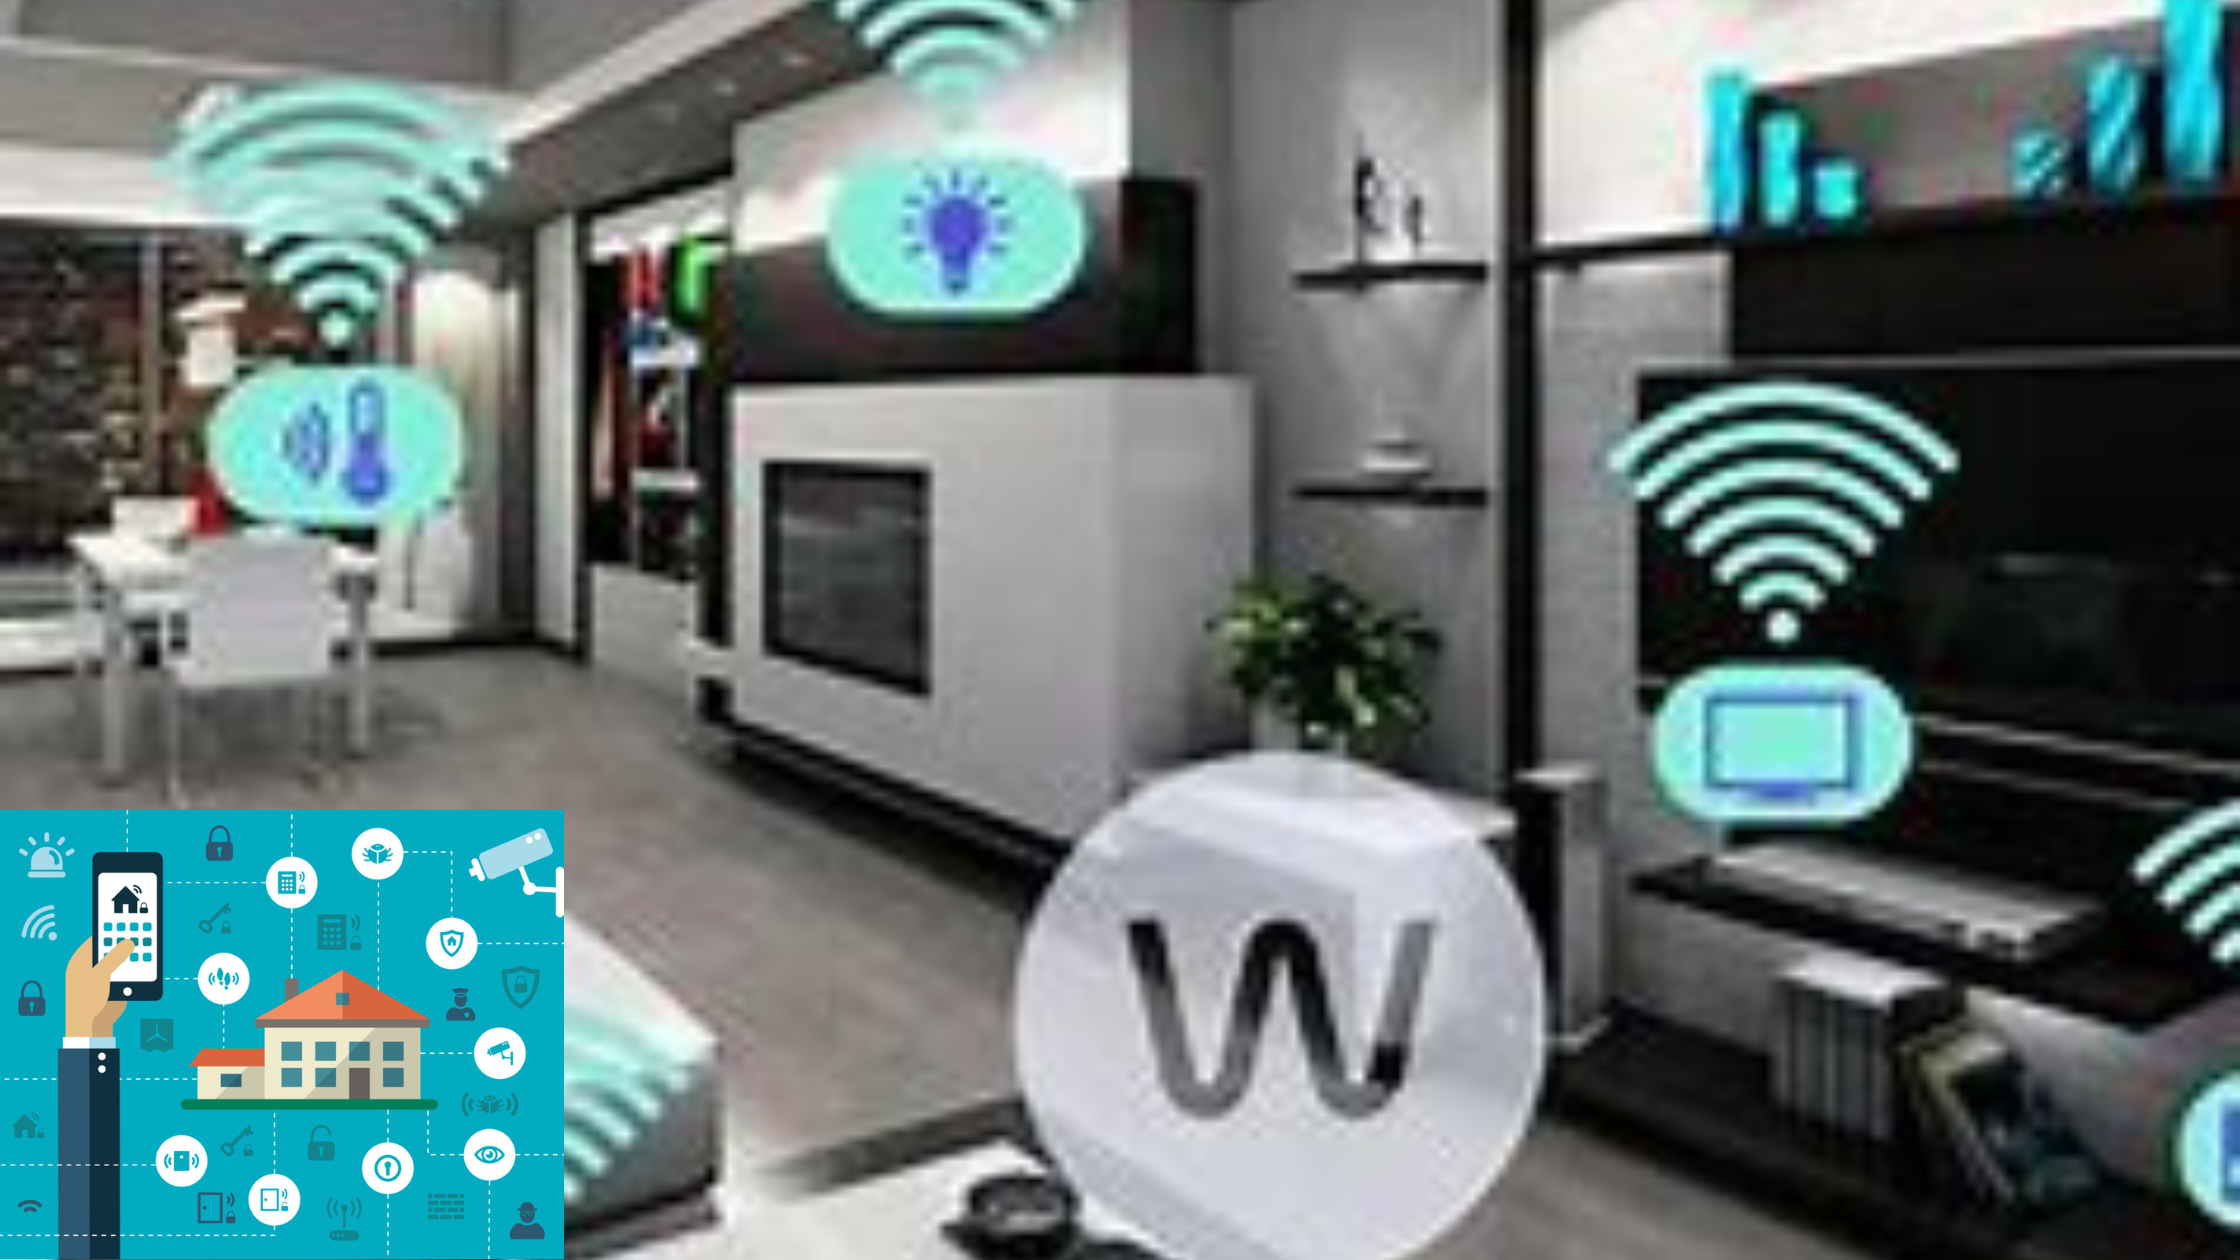 The Internet of Things (IoT) and Smart Home Devices